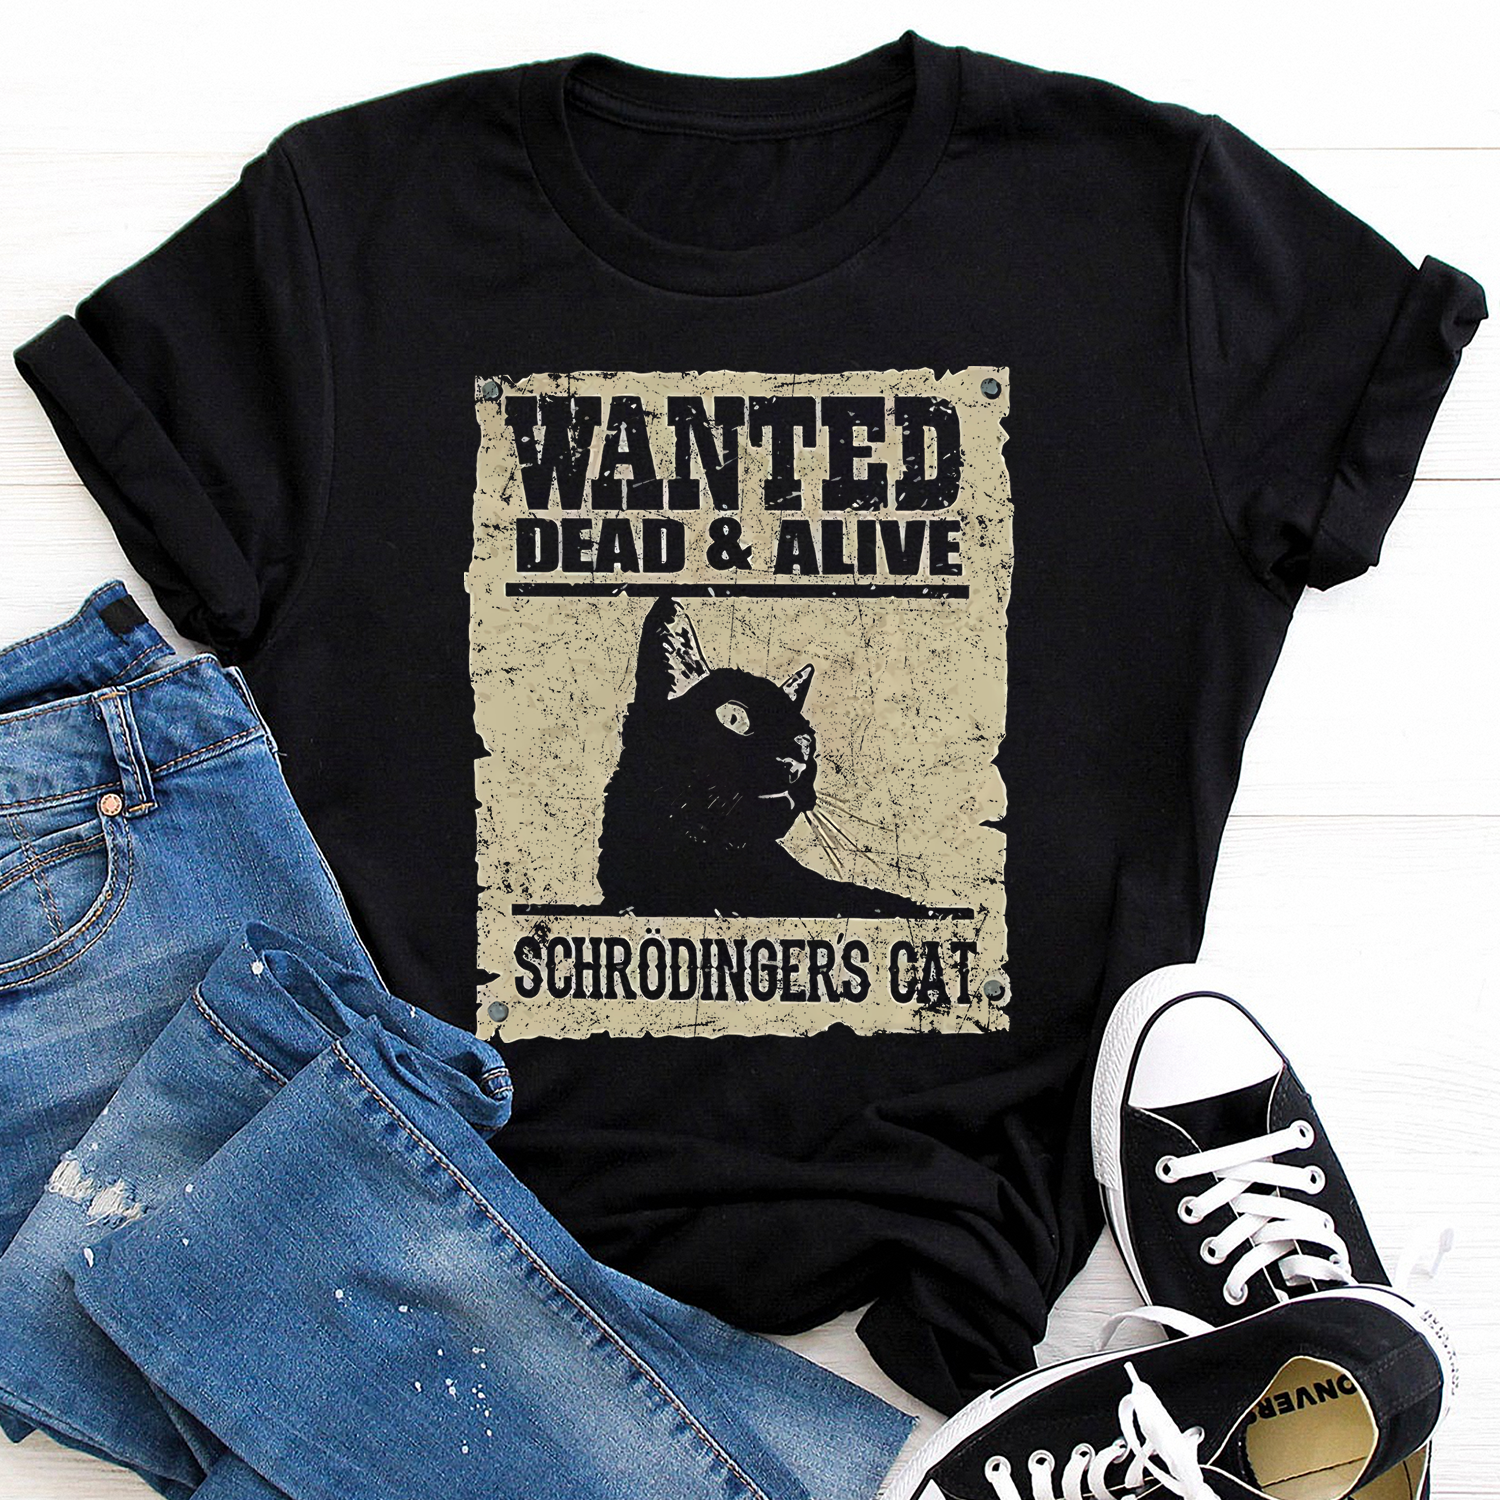 Wanted Dead & Alive Standard T-Shirt